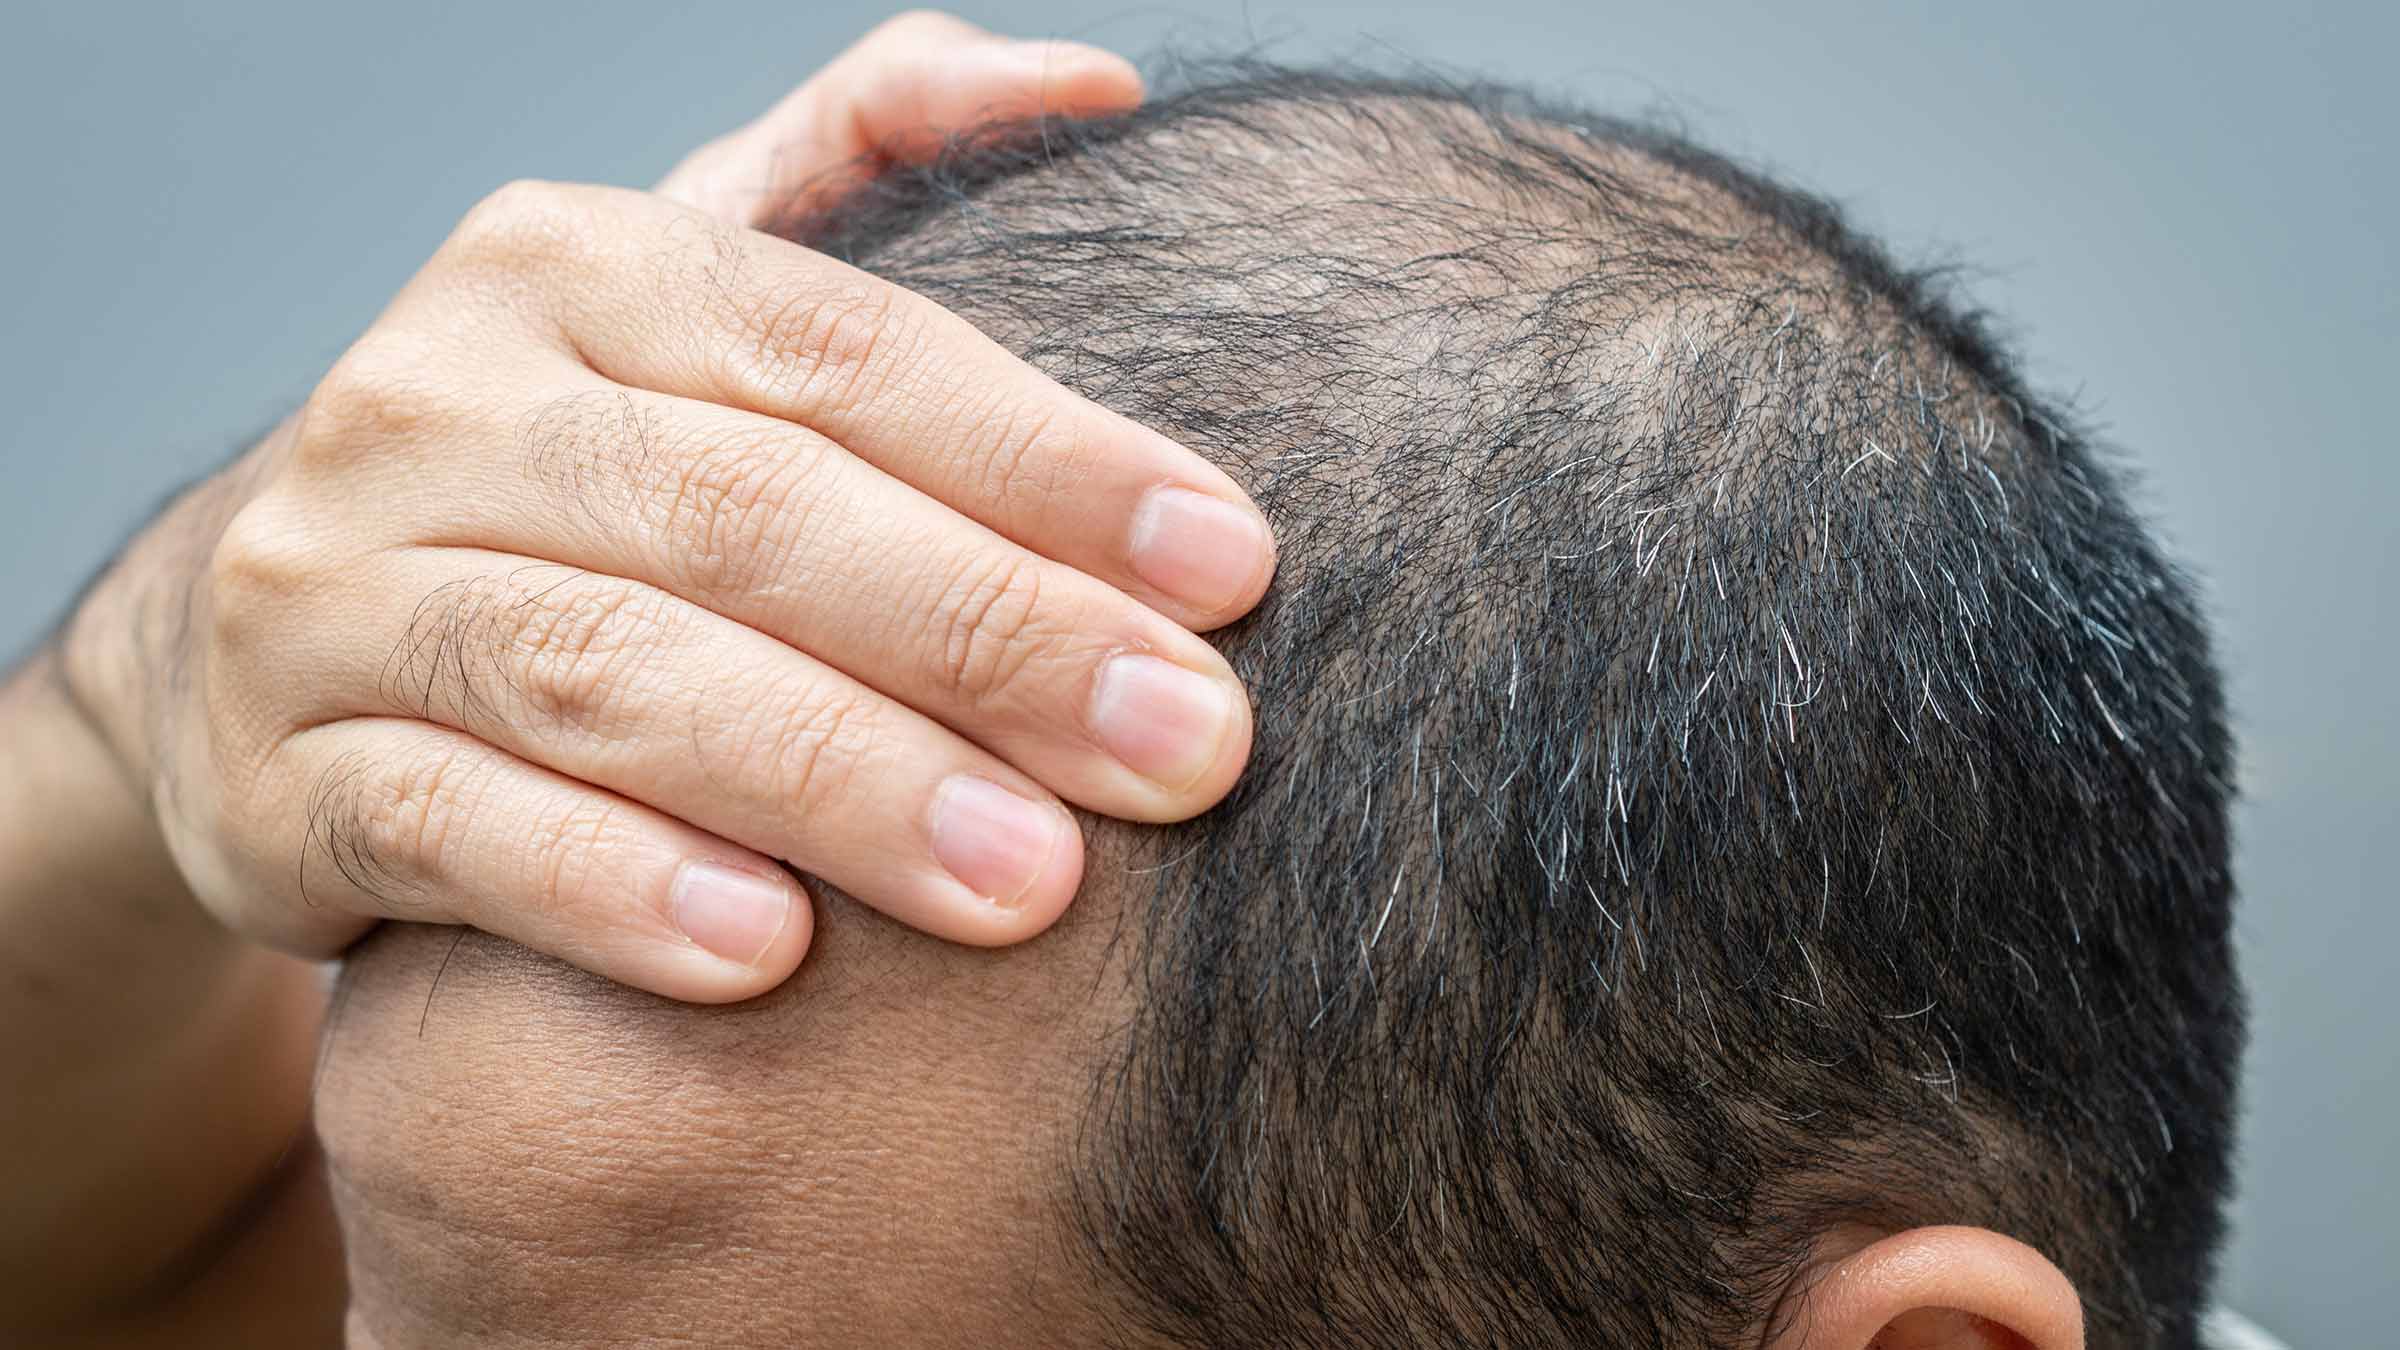 A close-up of a man touching his balding head